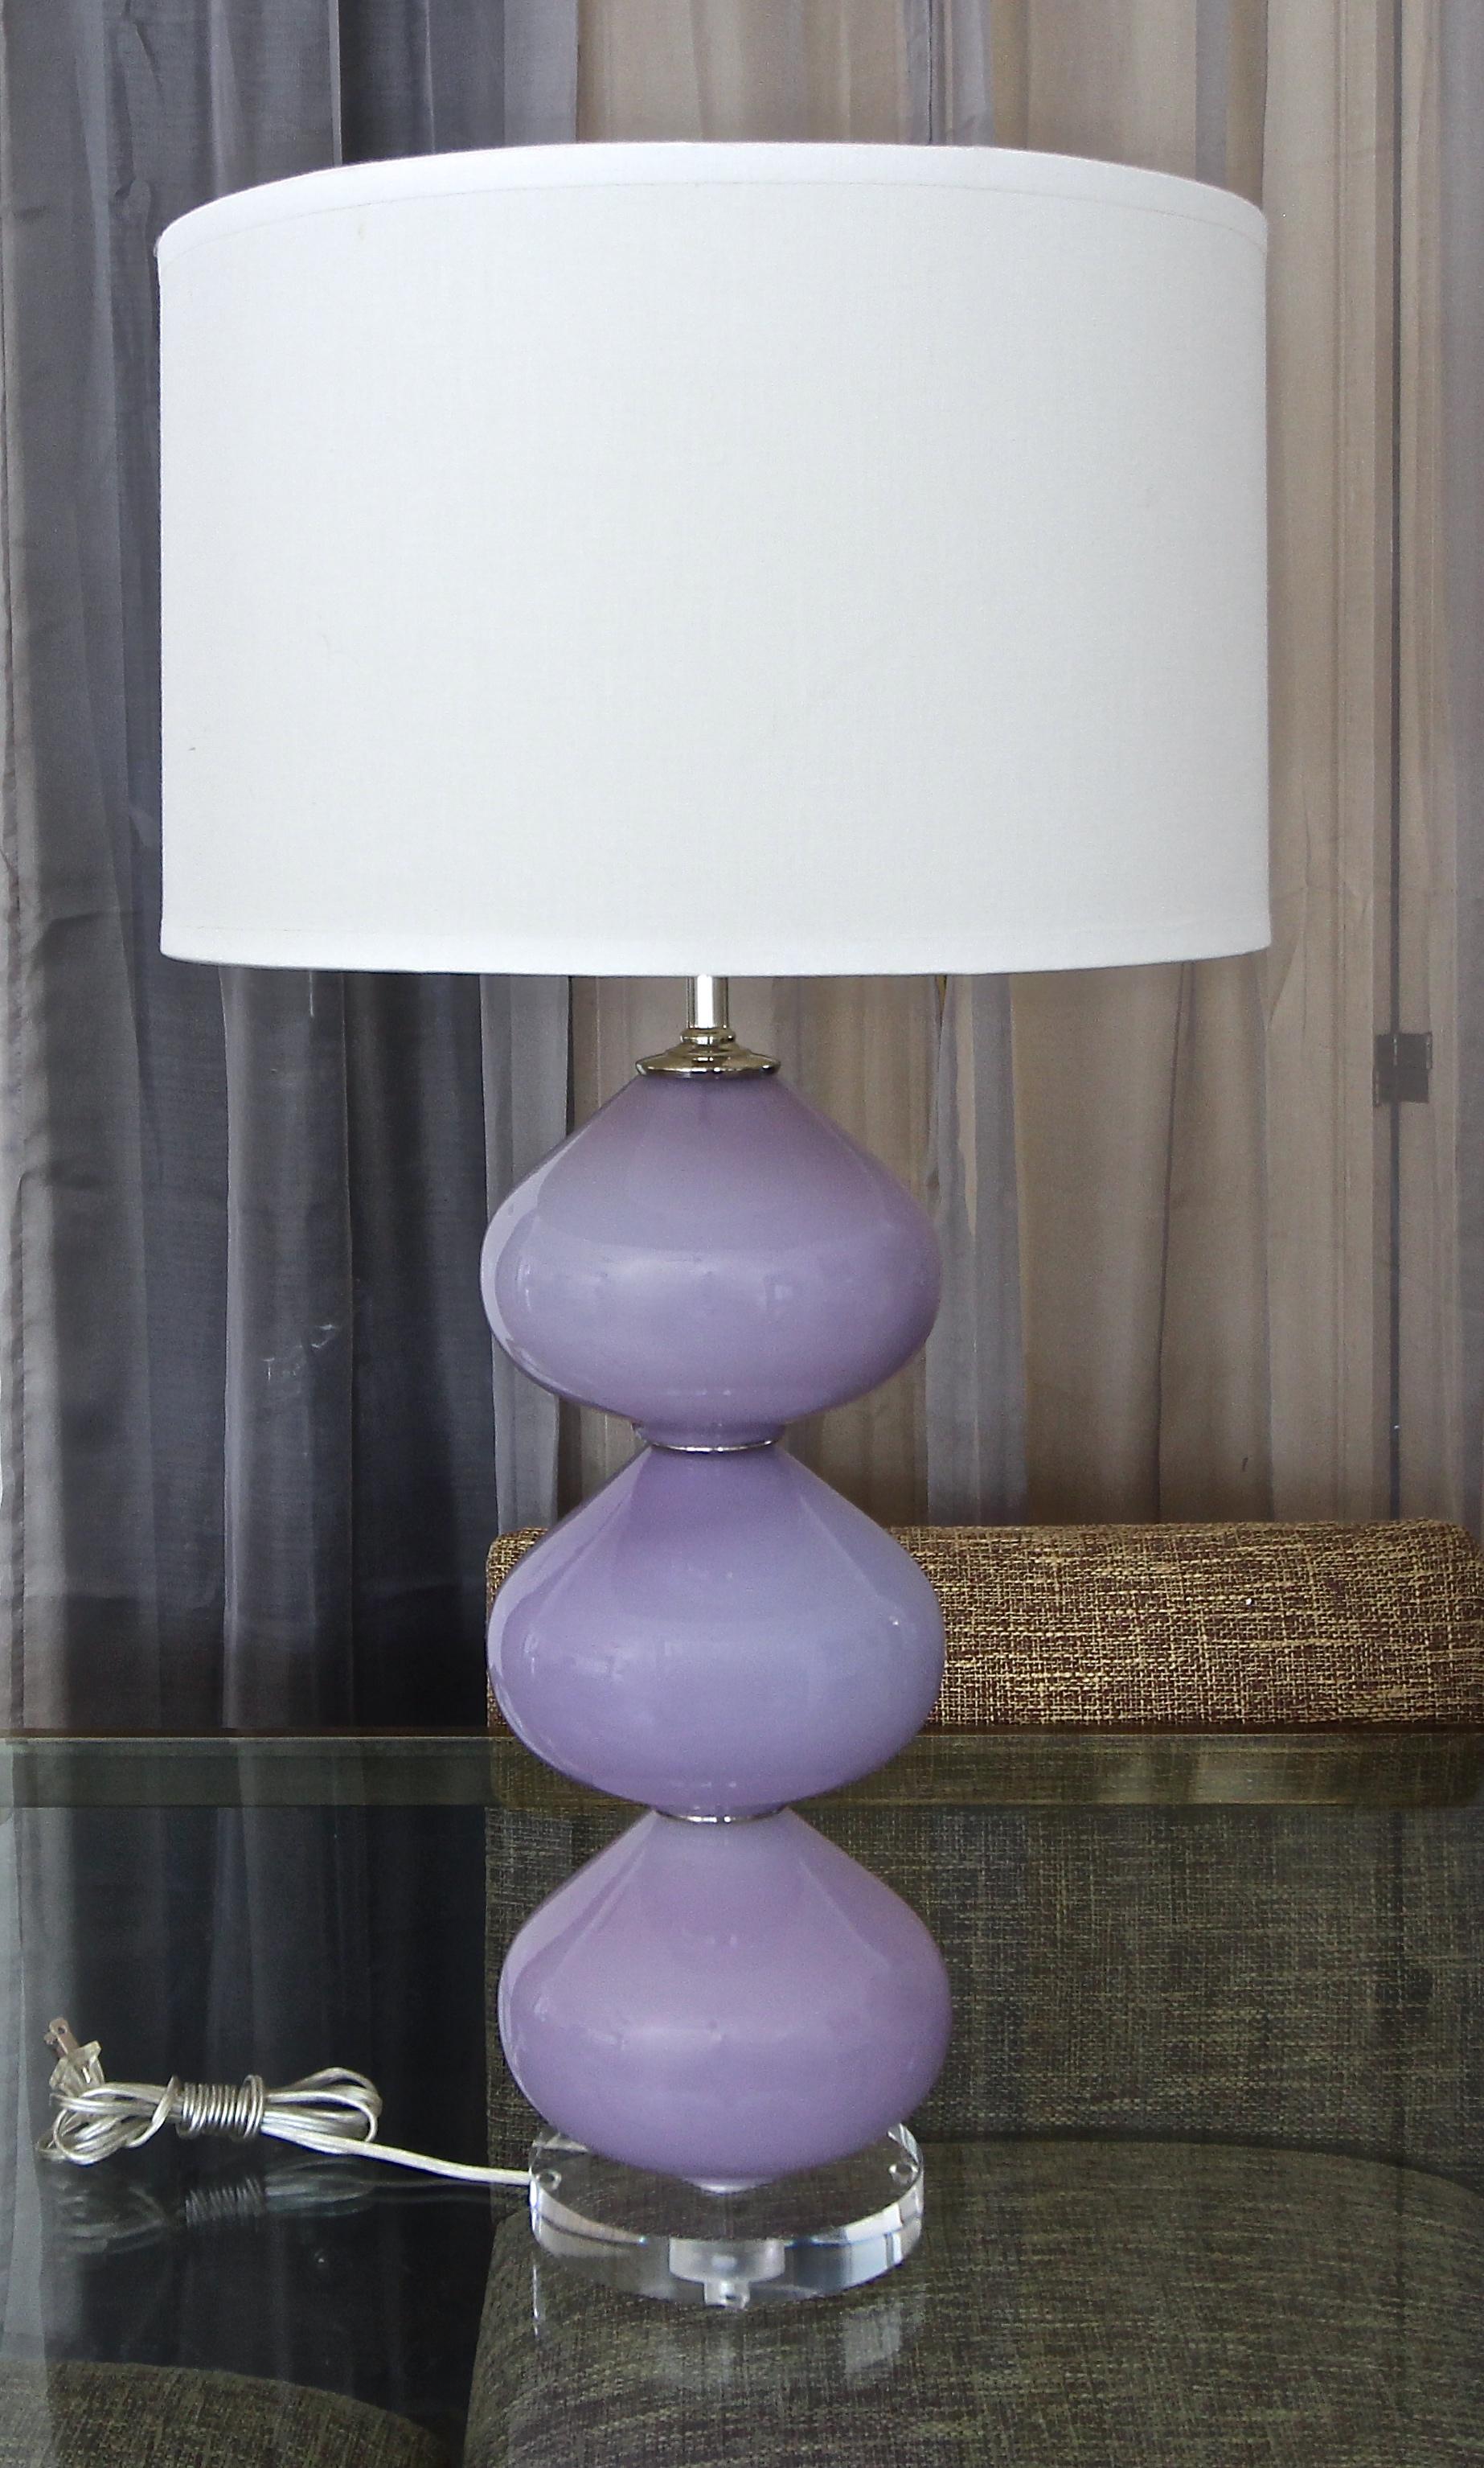 Italian blown lavender colored glass Murano table lamp with 3-stacked ball shape globes mounted on a custom acrylic base. Newly wired for US with new nickel hardware including new silver cord and 3 way socket.

Measure: Height to top of glass is